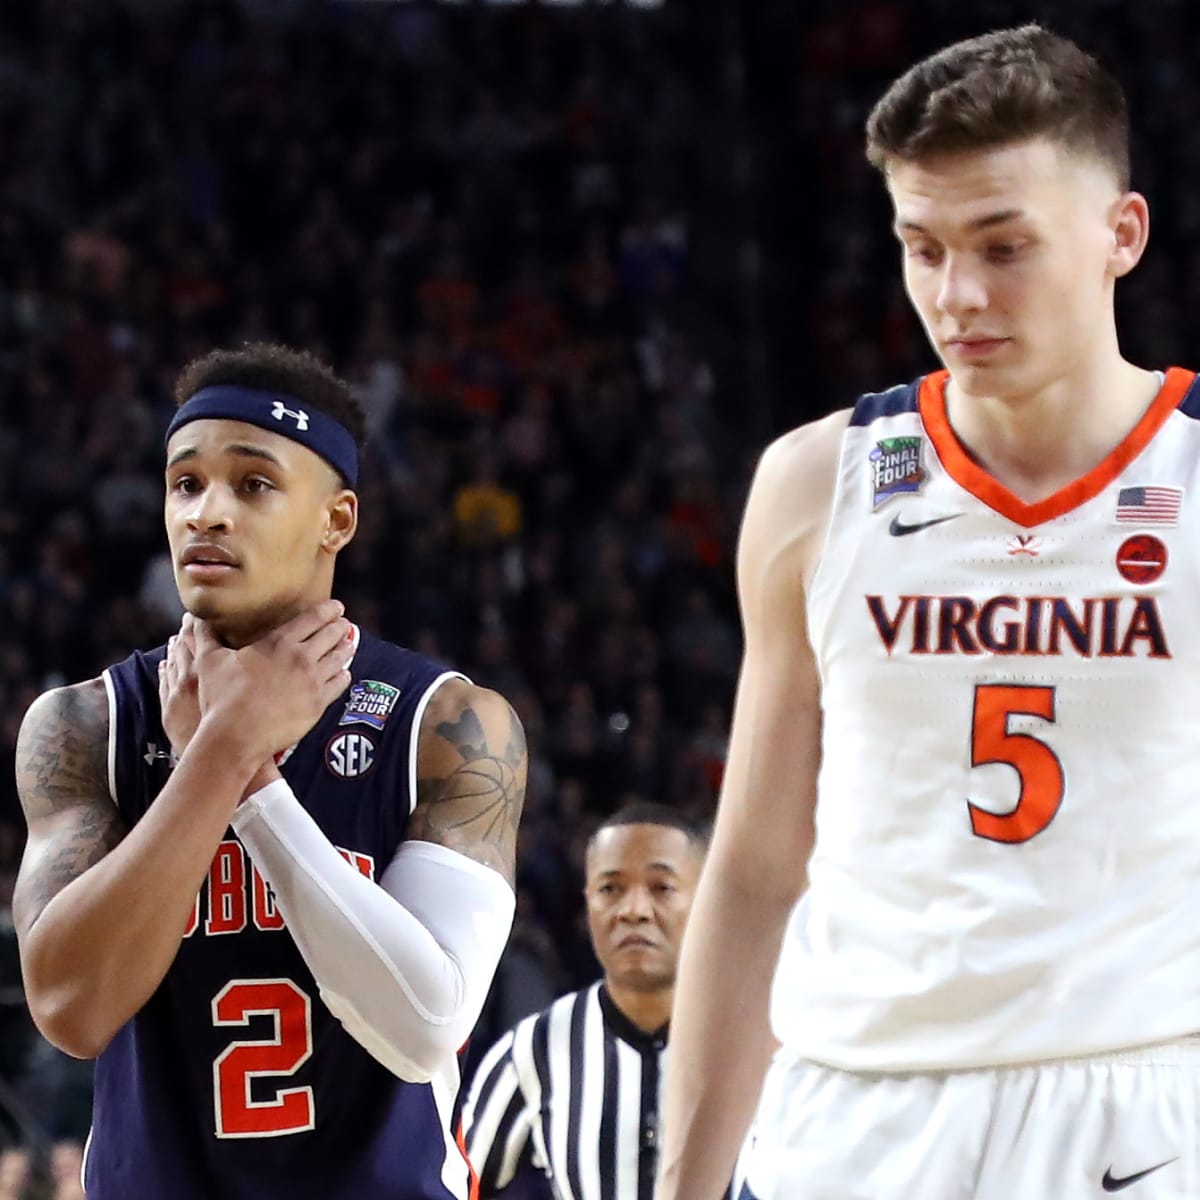 Family affair: Virginia star Kyle Guy has the support of his four (yes,  four!) parents, five siblings and fiancée - The Athletic